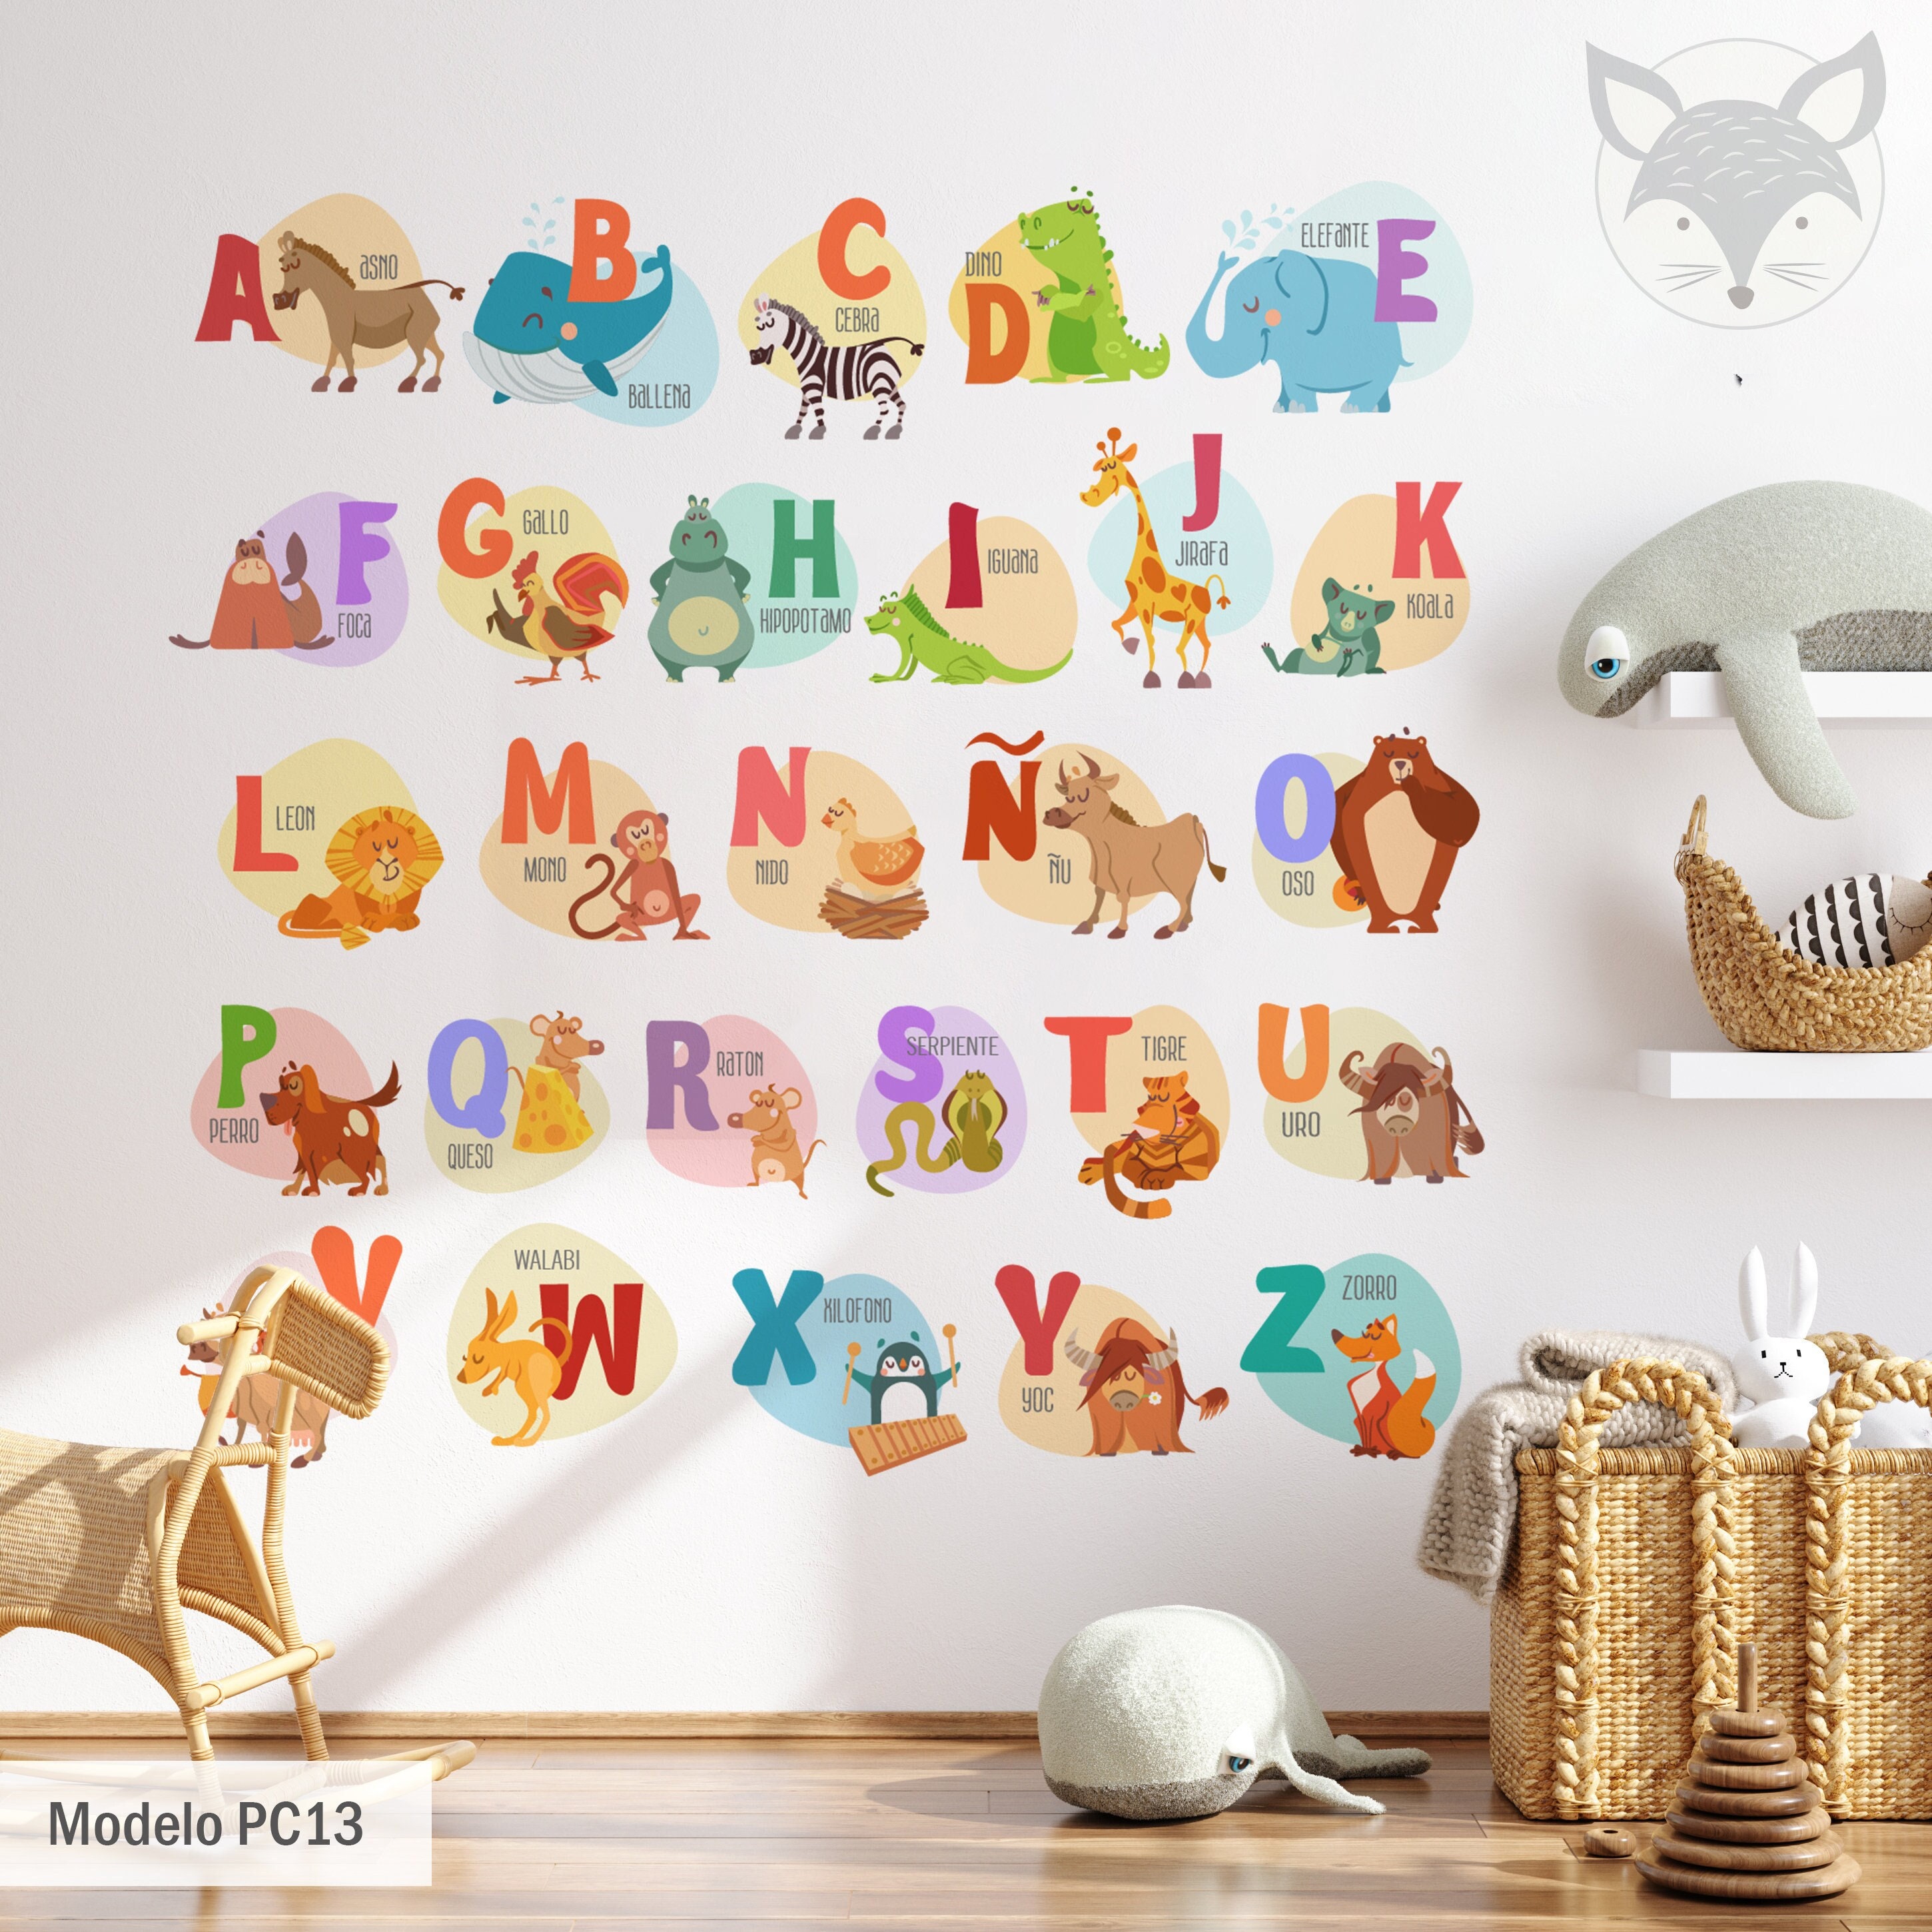 Alphabet Wall Decal, Kids ABC Wall Stickers, Illustrated Letter